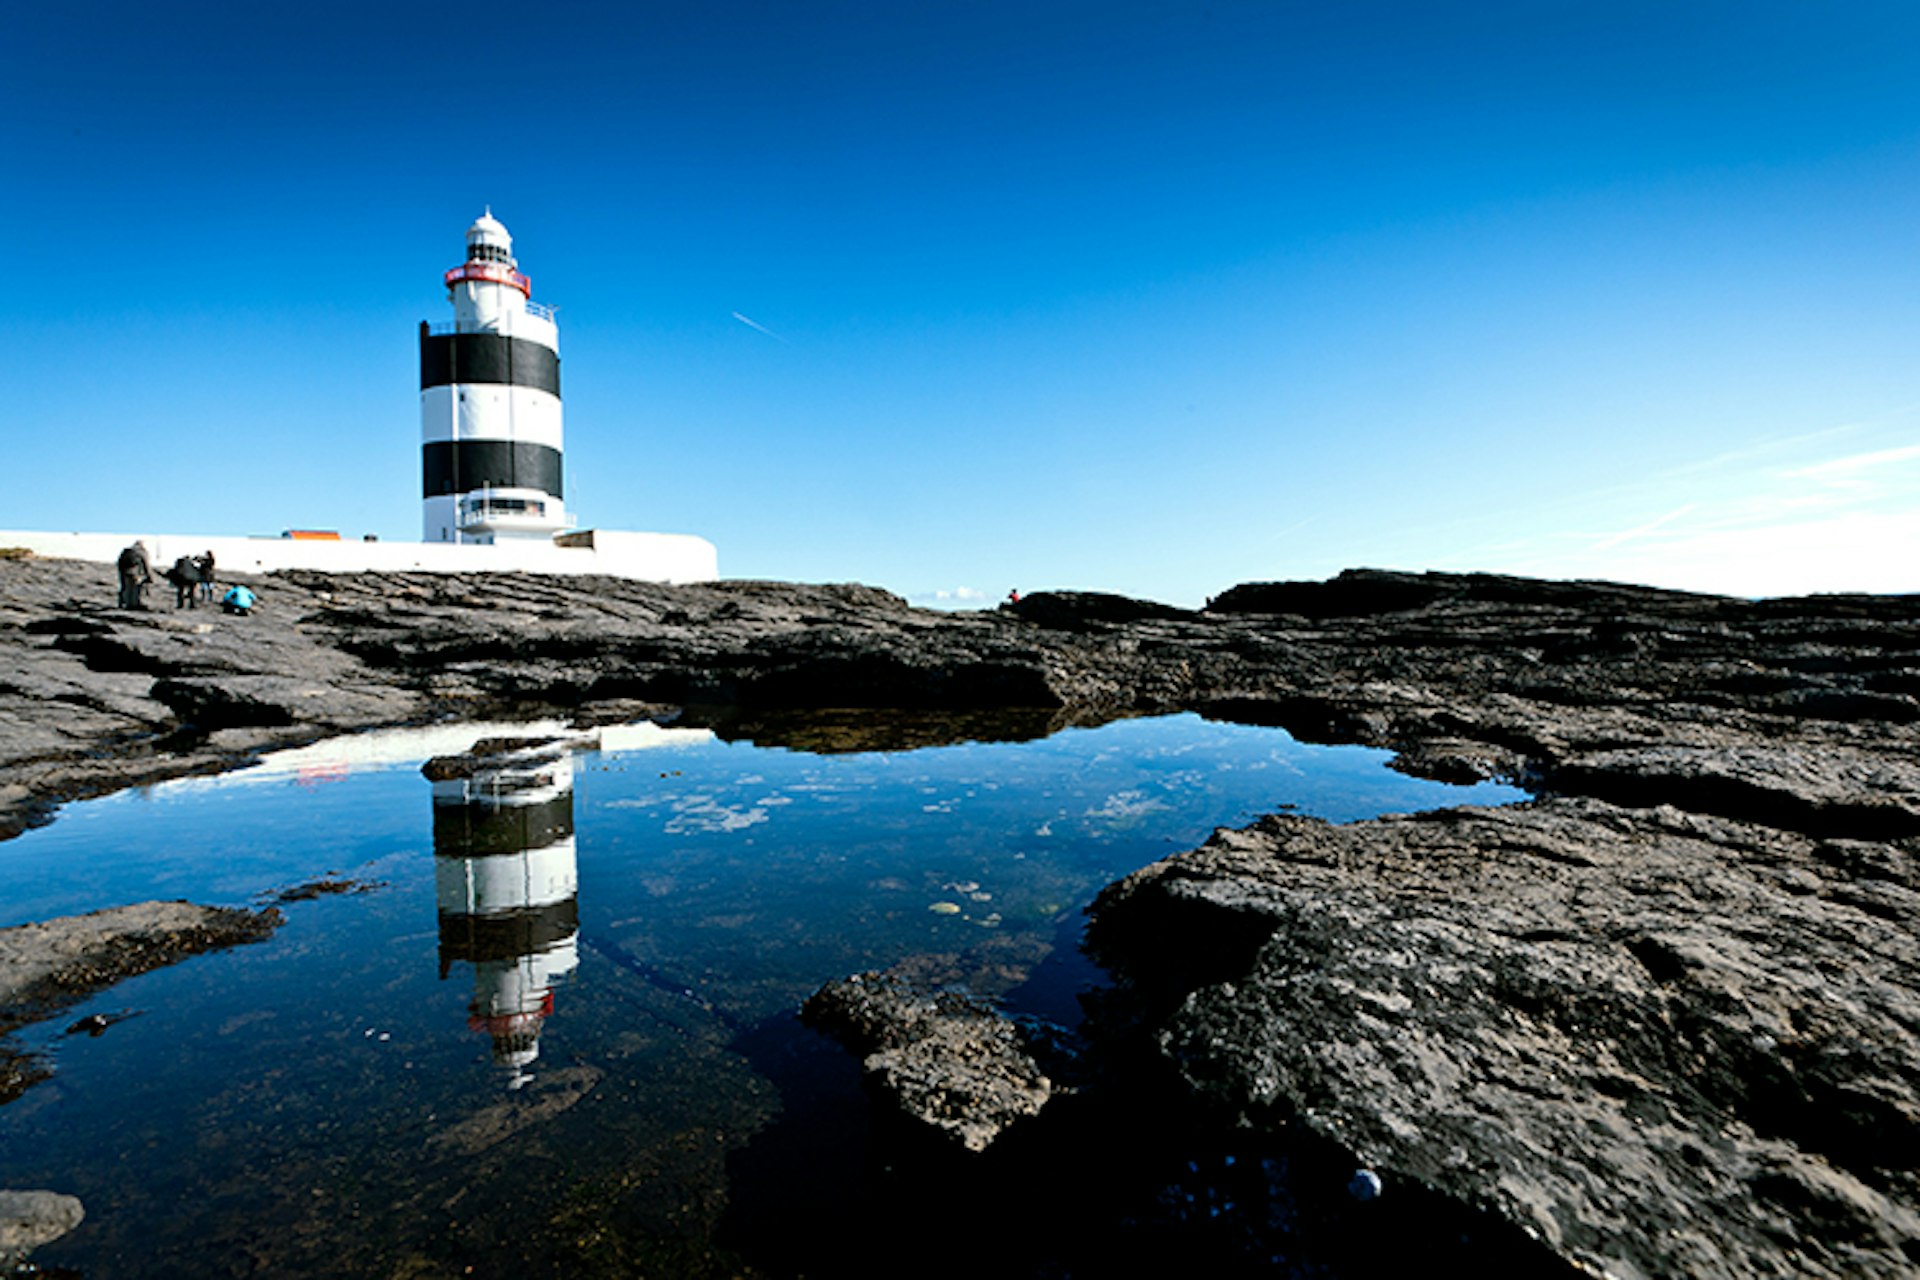 Ireland's Hook Head Lighthouse is a glorious backdrop for a drama. Image by Dave G Kelly / Moment Open / Getty Images